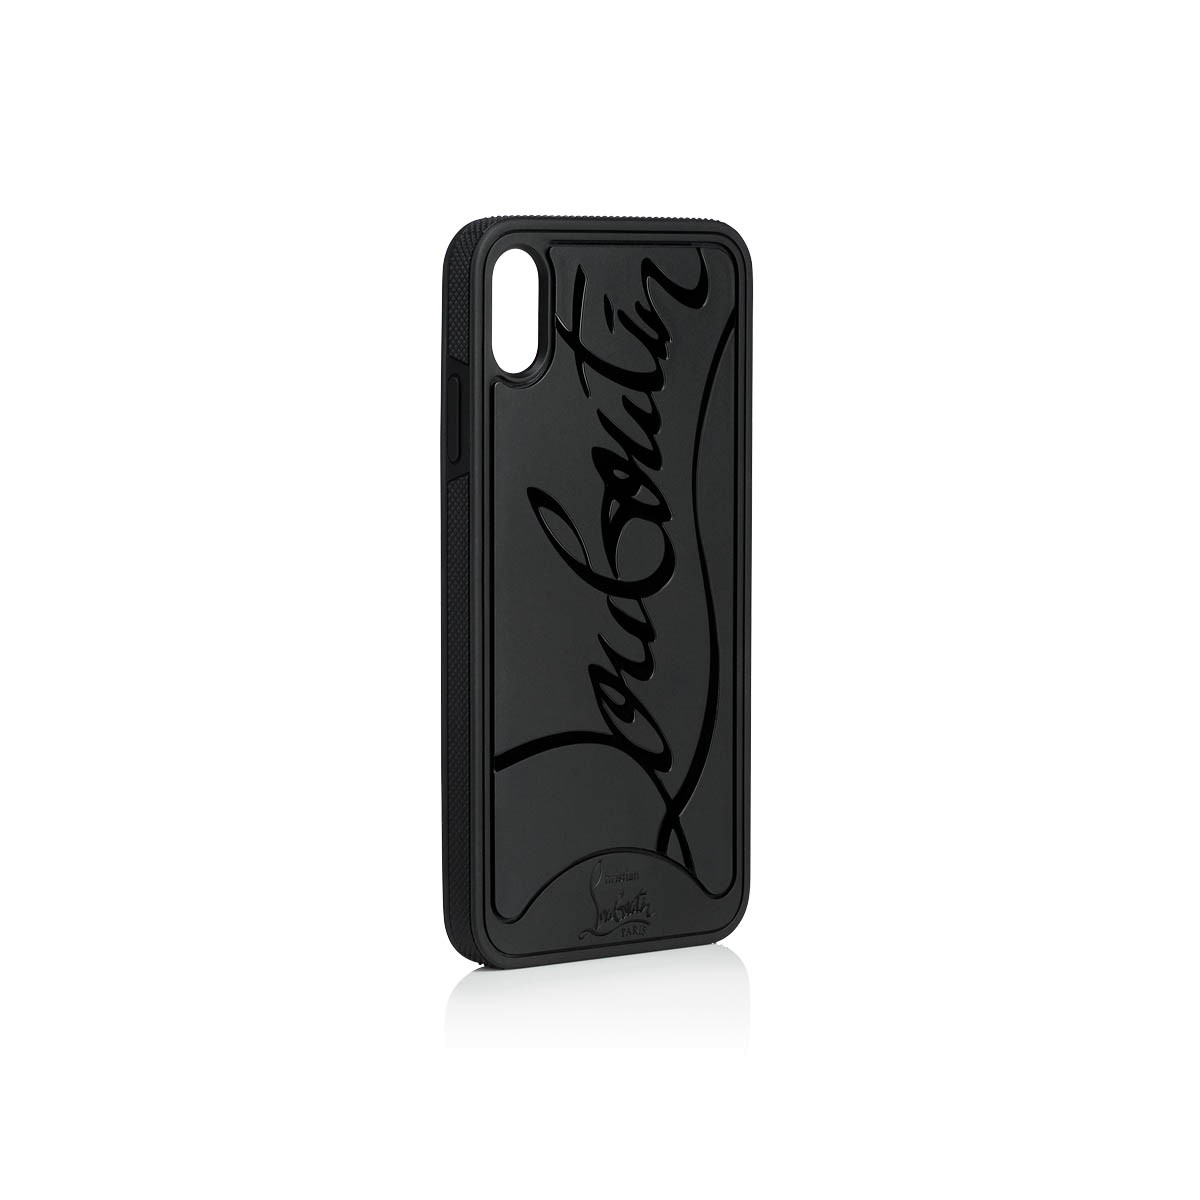 coque louboutin iphone xs max